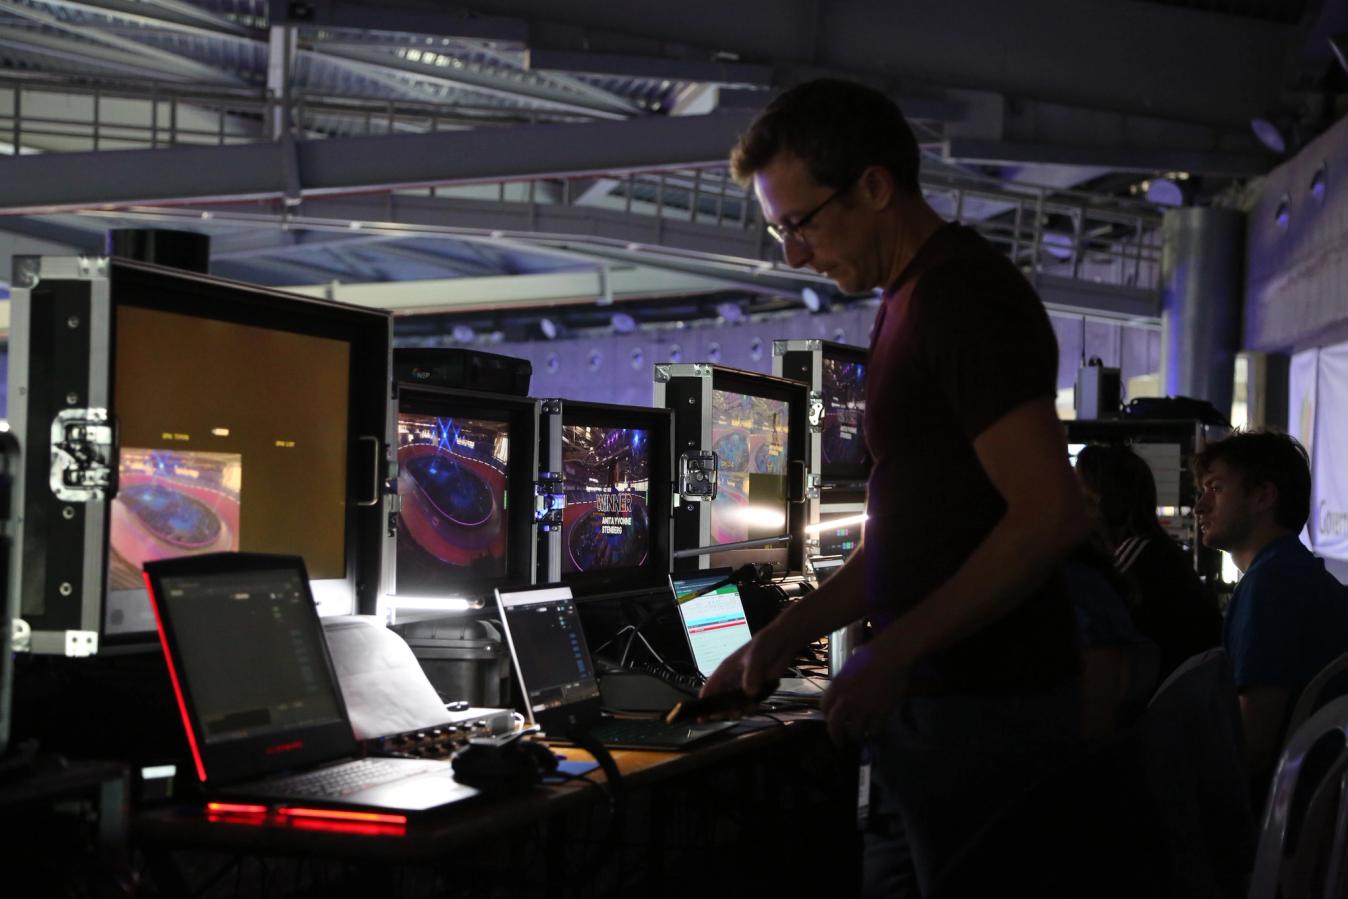 Backstage, banks of screens monitor everything meticulously